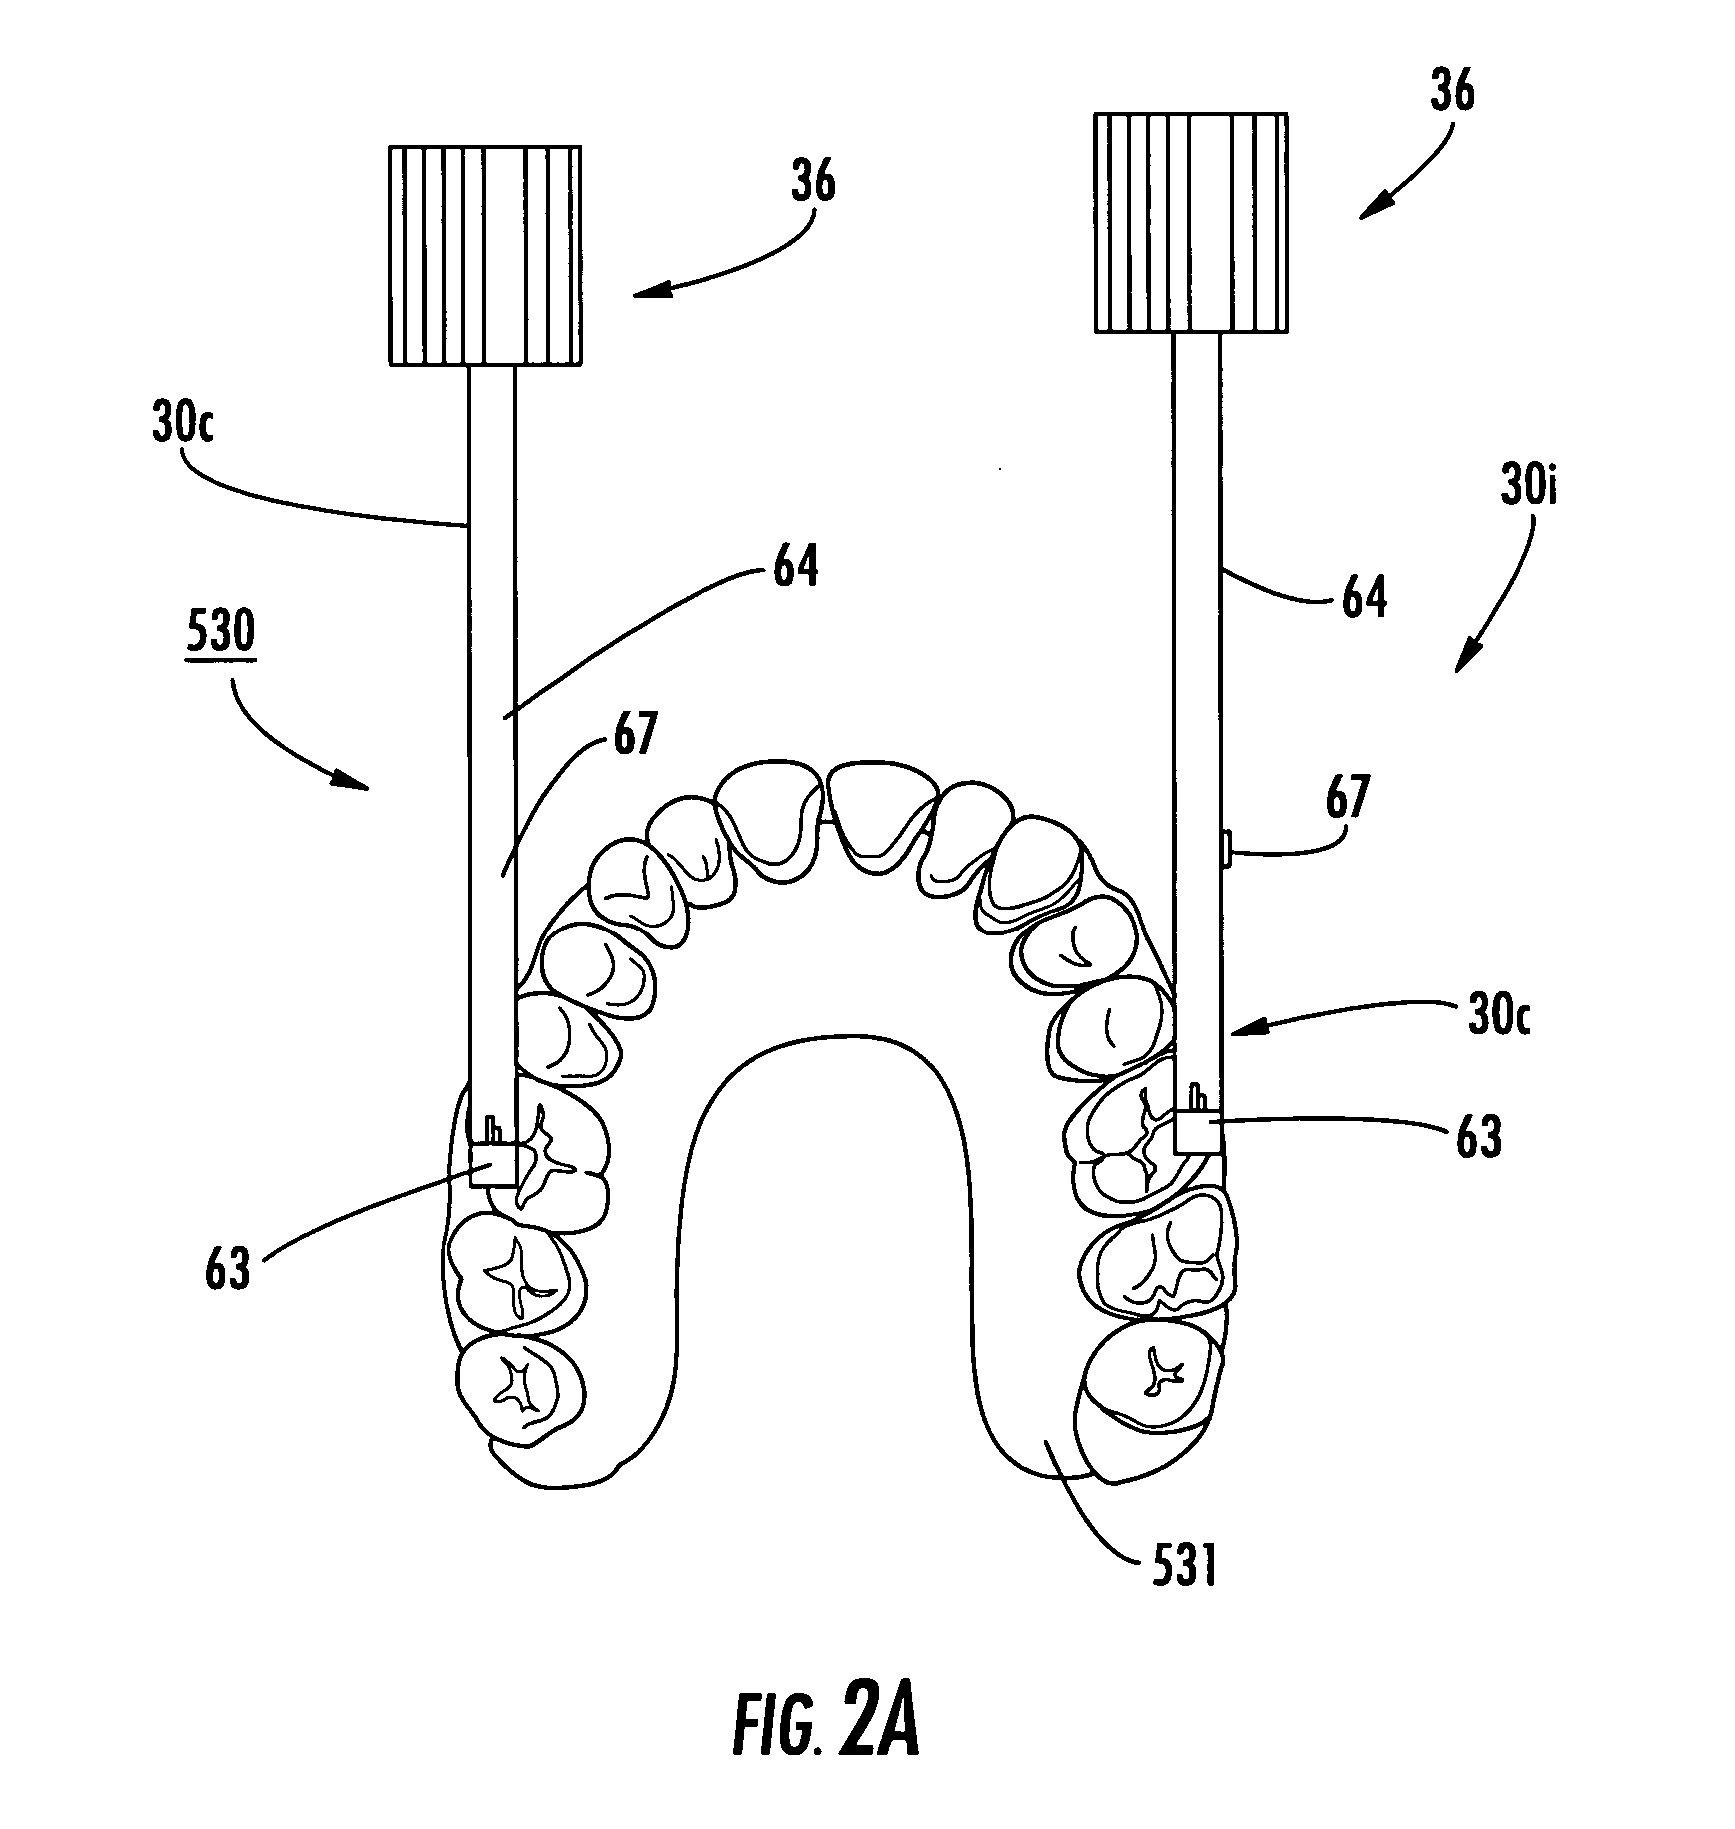 Disposable single-use internal dosimeters for detecting radiation in medical procedures/therapies